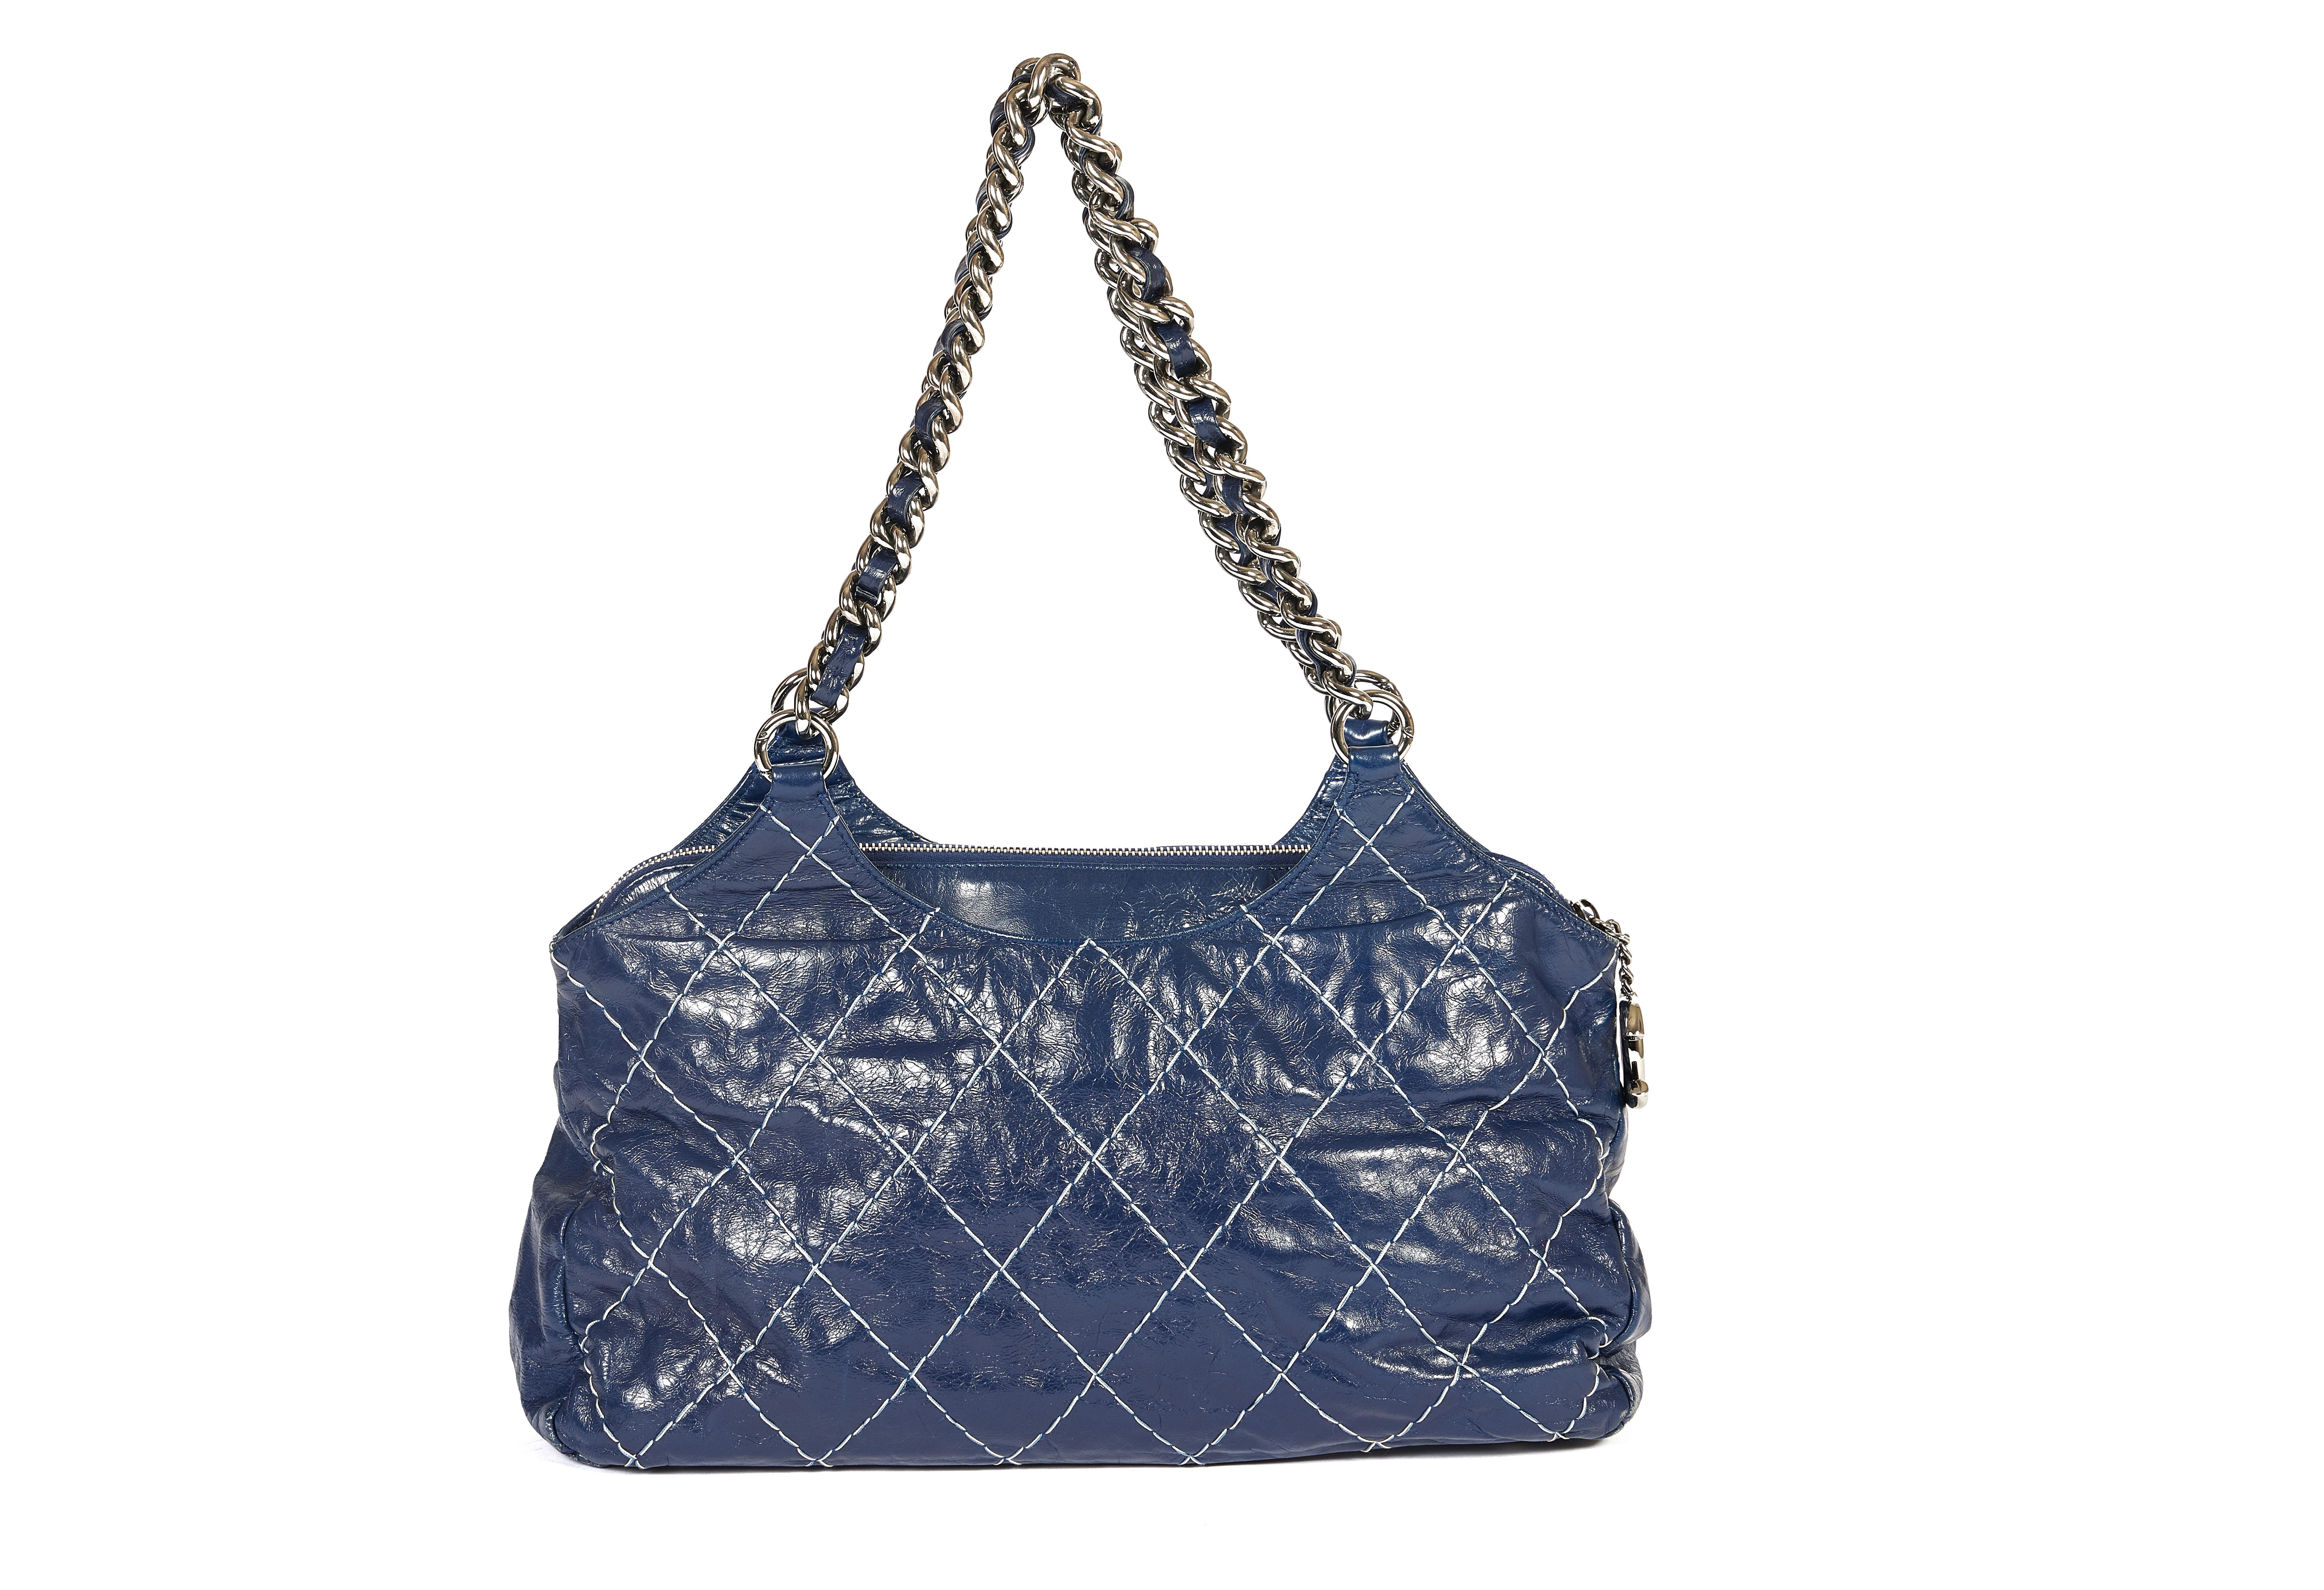 Chanel Dark Blue Distressed Shoulder Bag In Excellent Condition For Sale In West Hollywood, CA